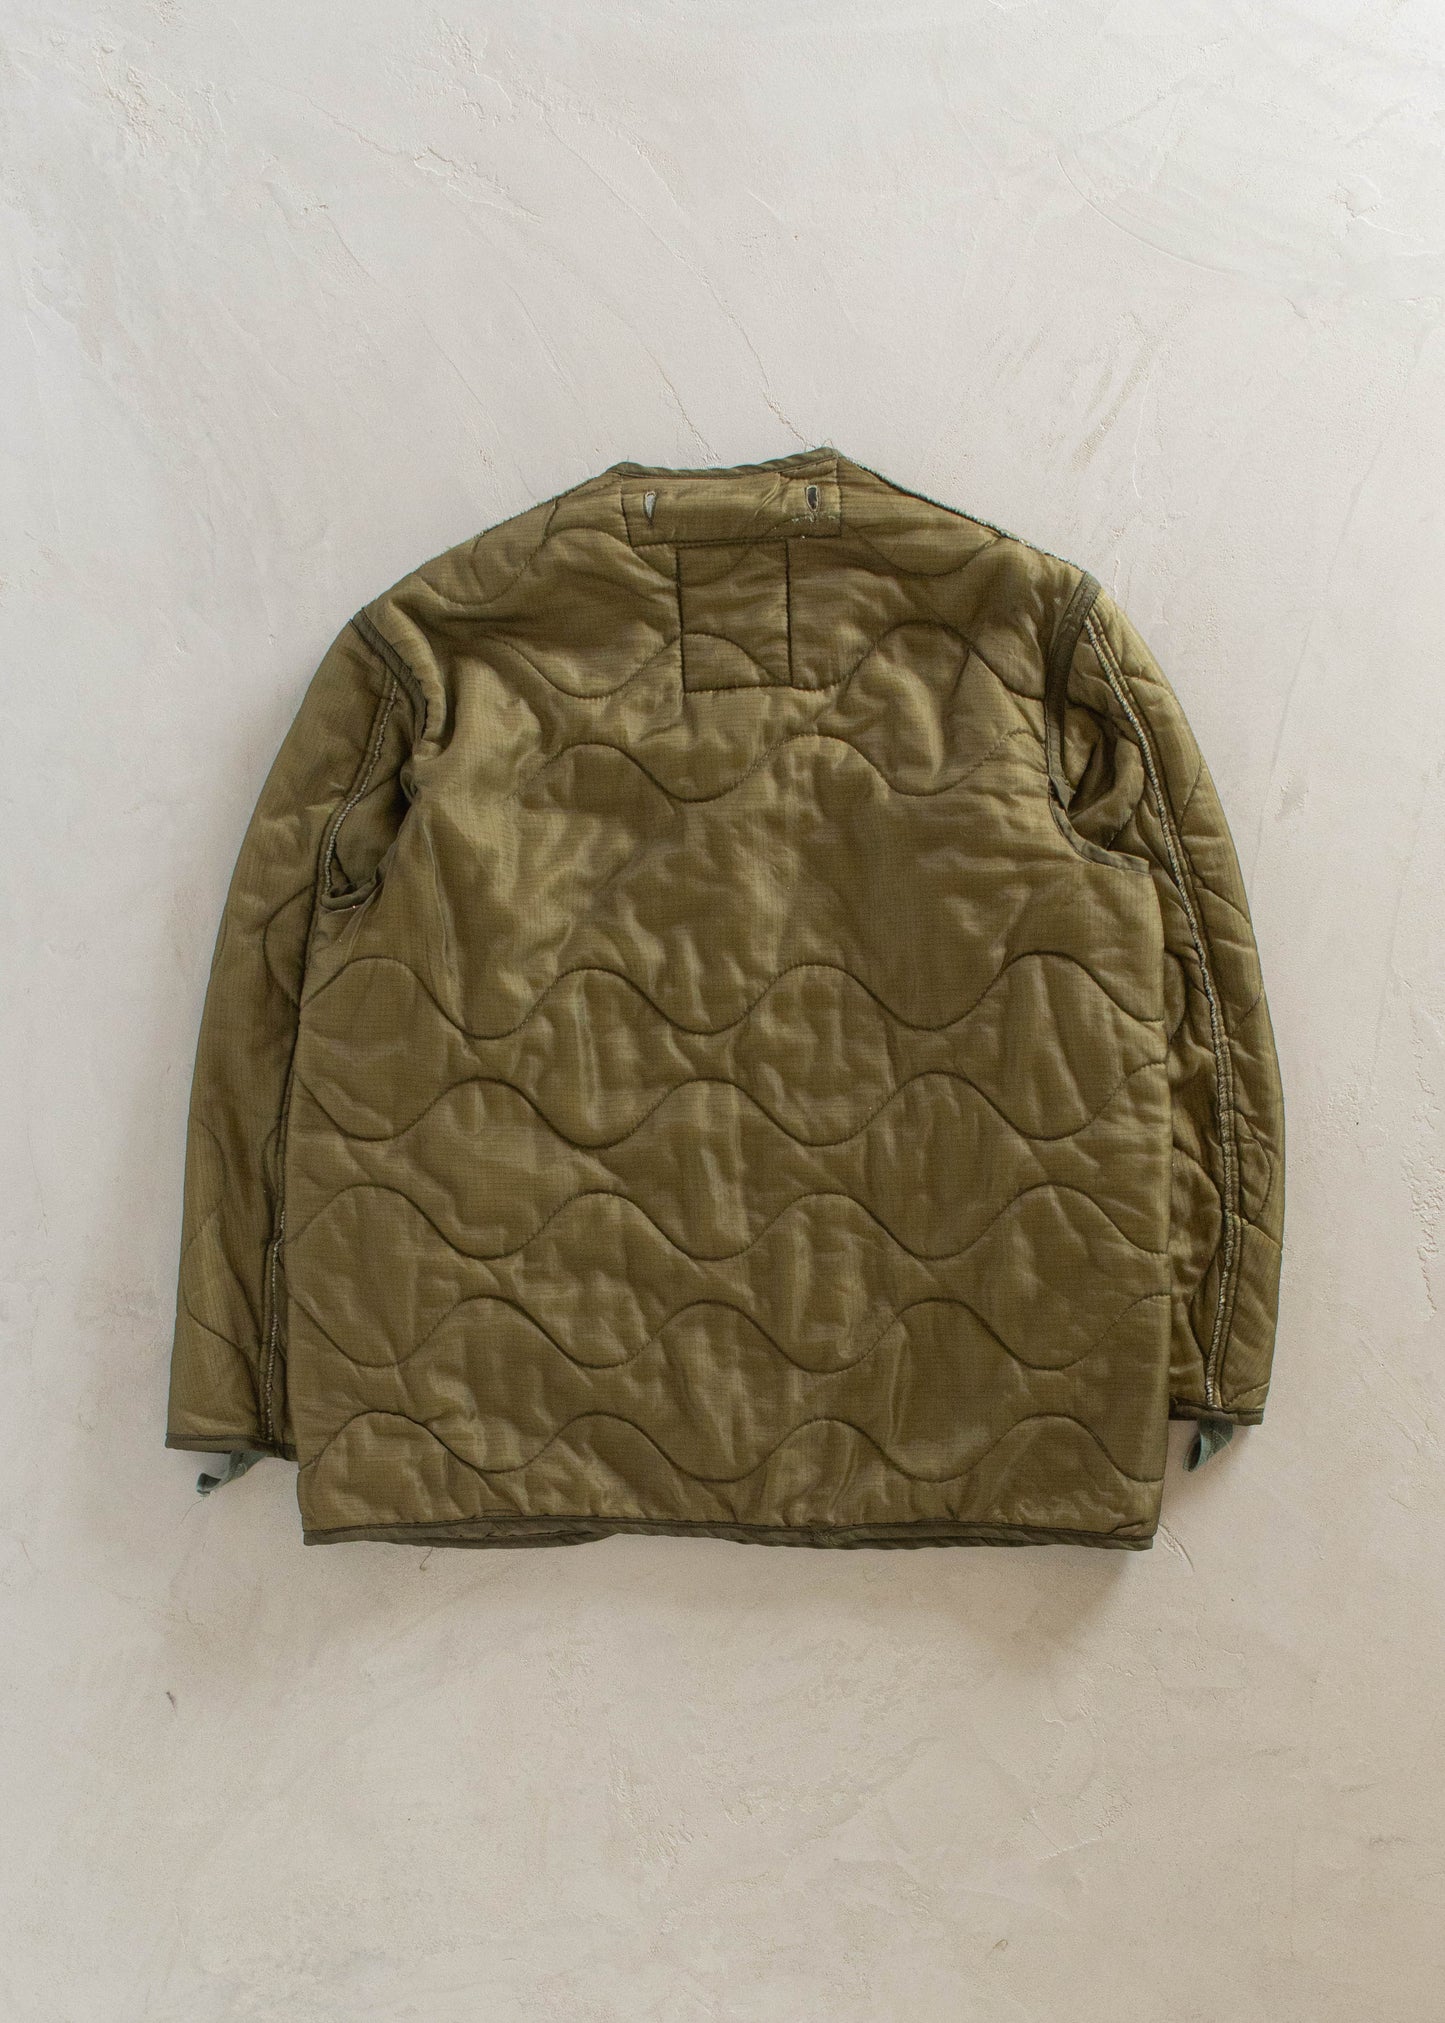 1980s Military M-65 Quilted Liner Jacket Size S/M